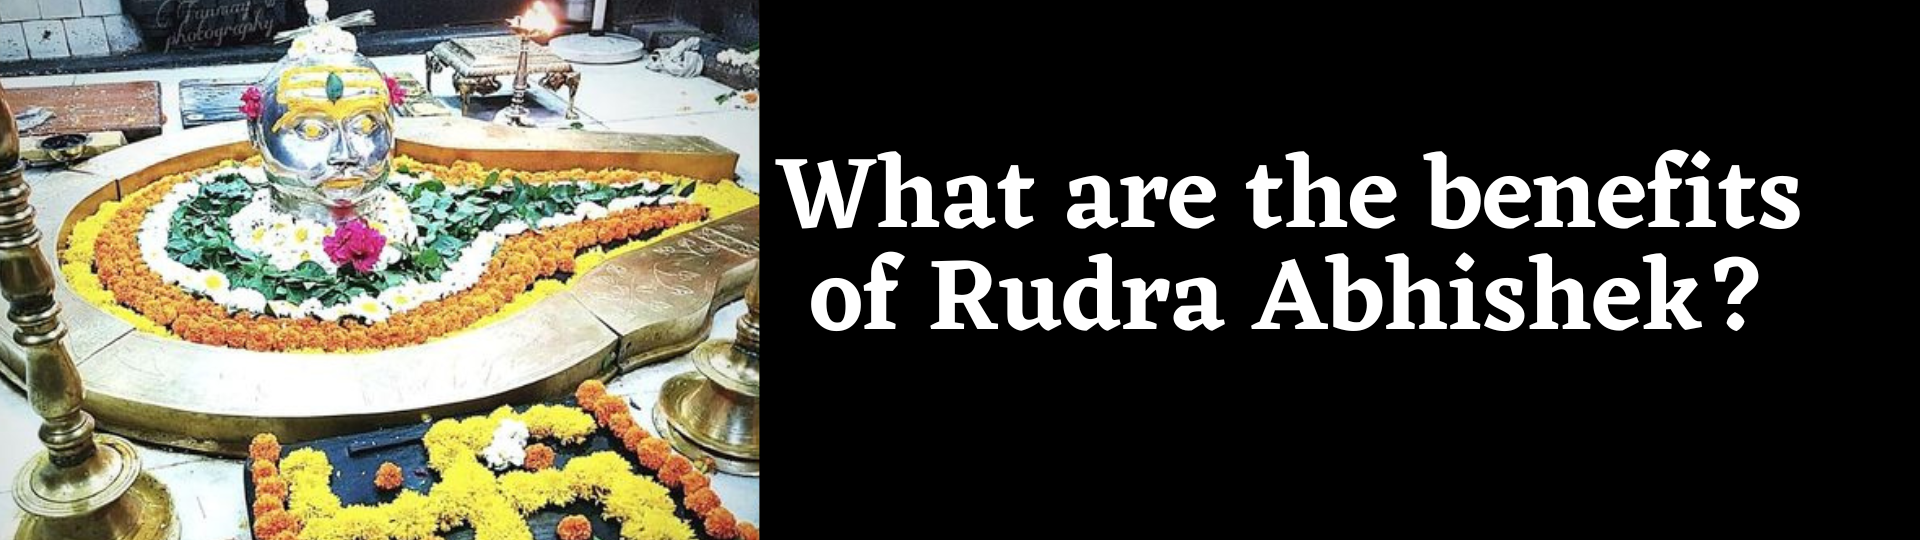 What are the benefits of Rudra Abhishek?<br />
